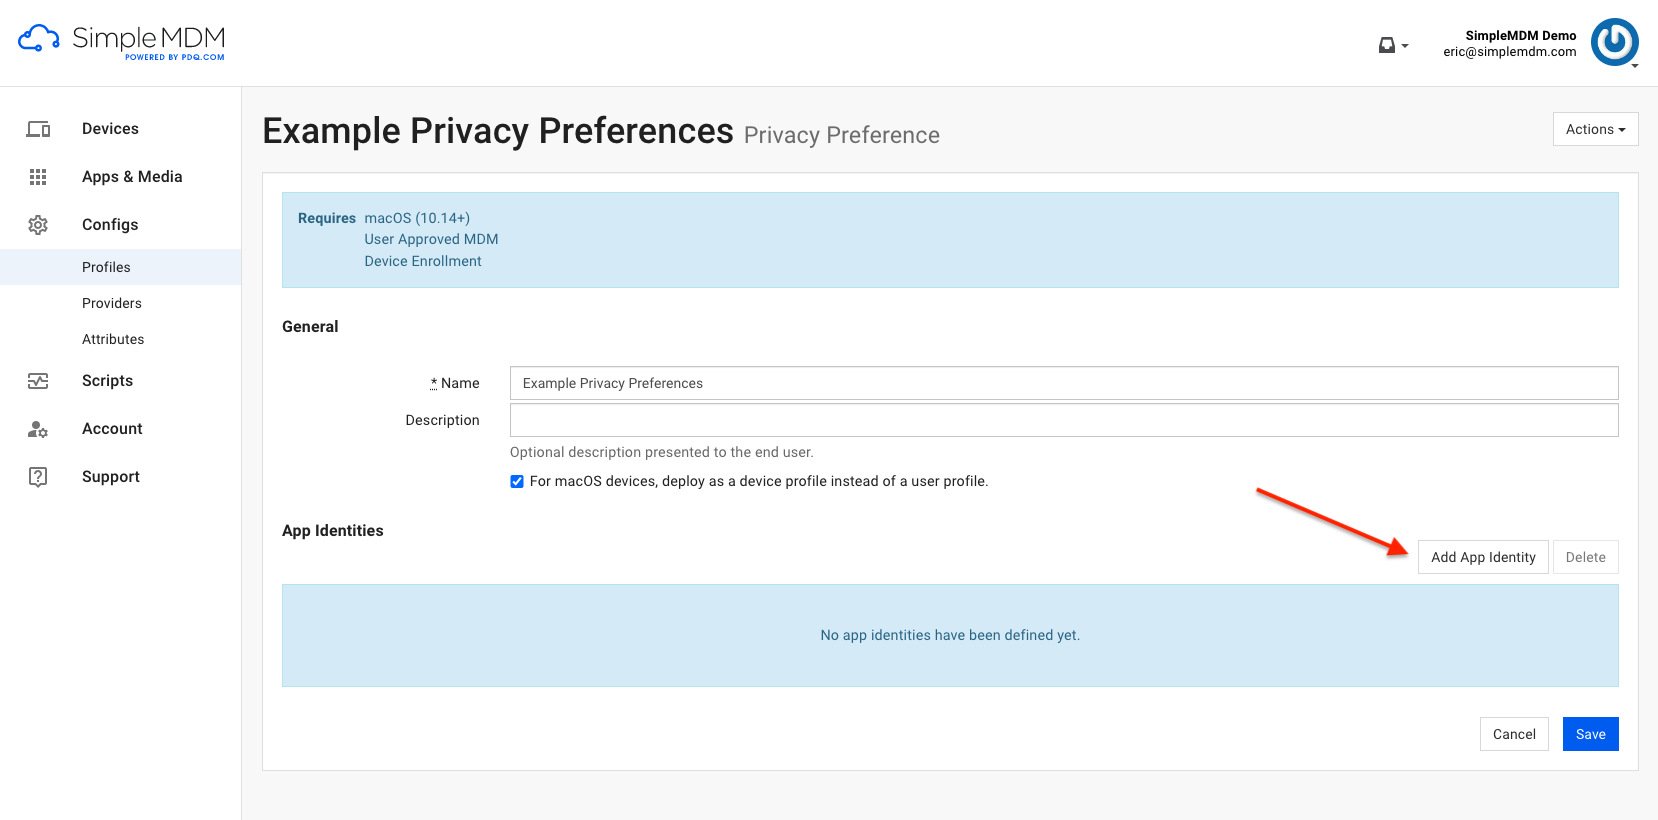 Image of the "Add App Identity" button in the Privacy Preference panel of the SimpleMDM Profiles section